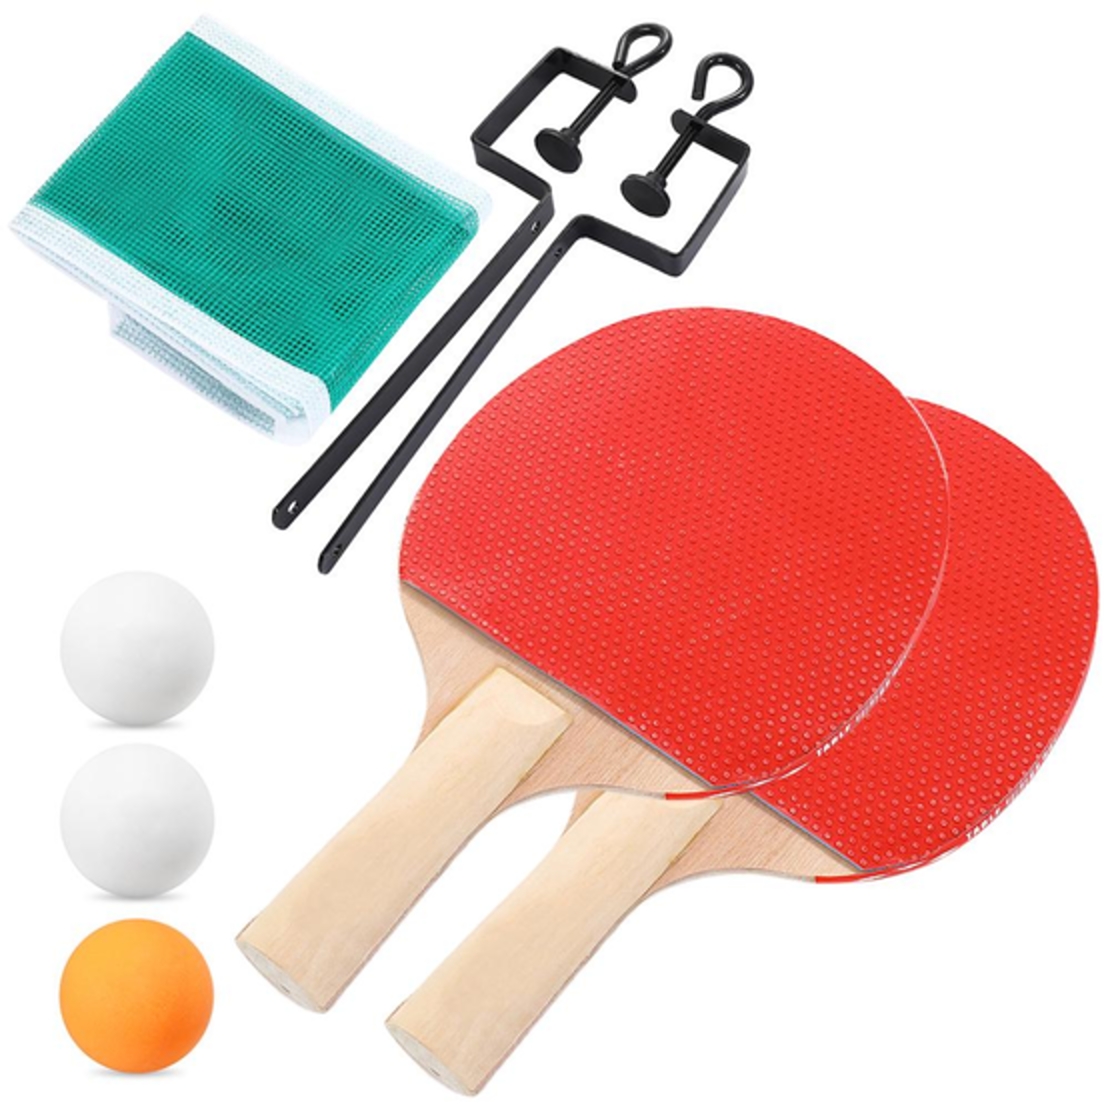 ping pong set include net and stand